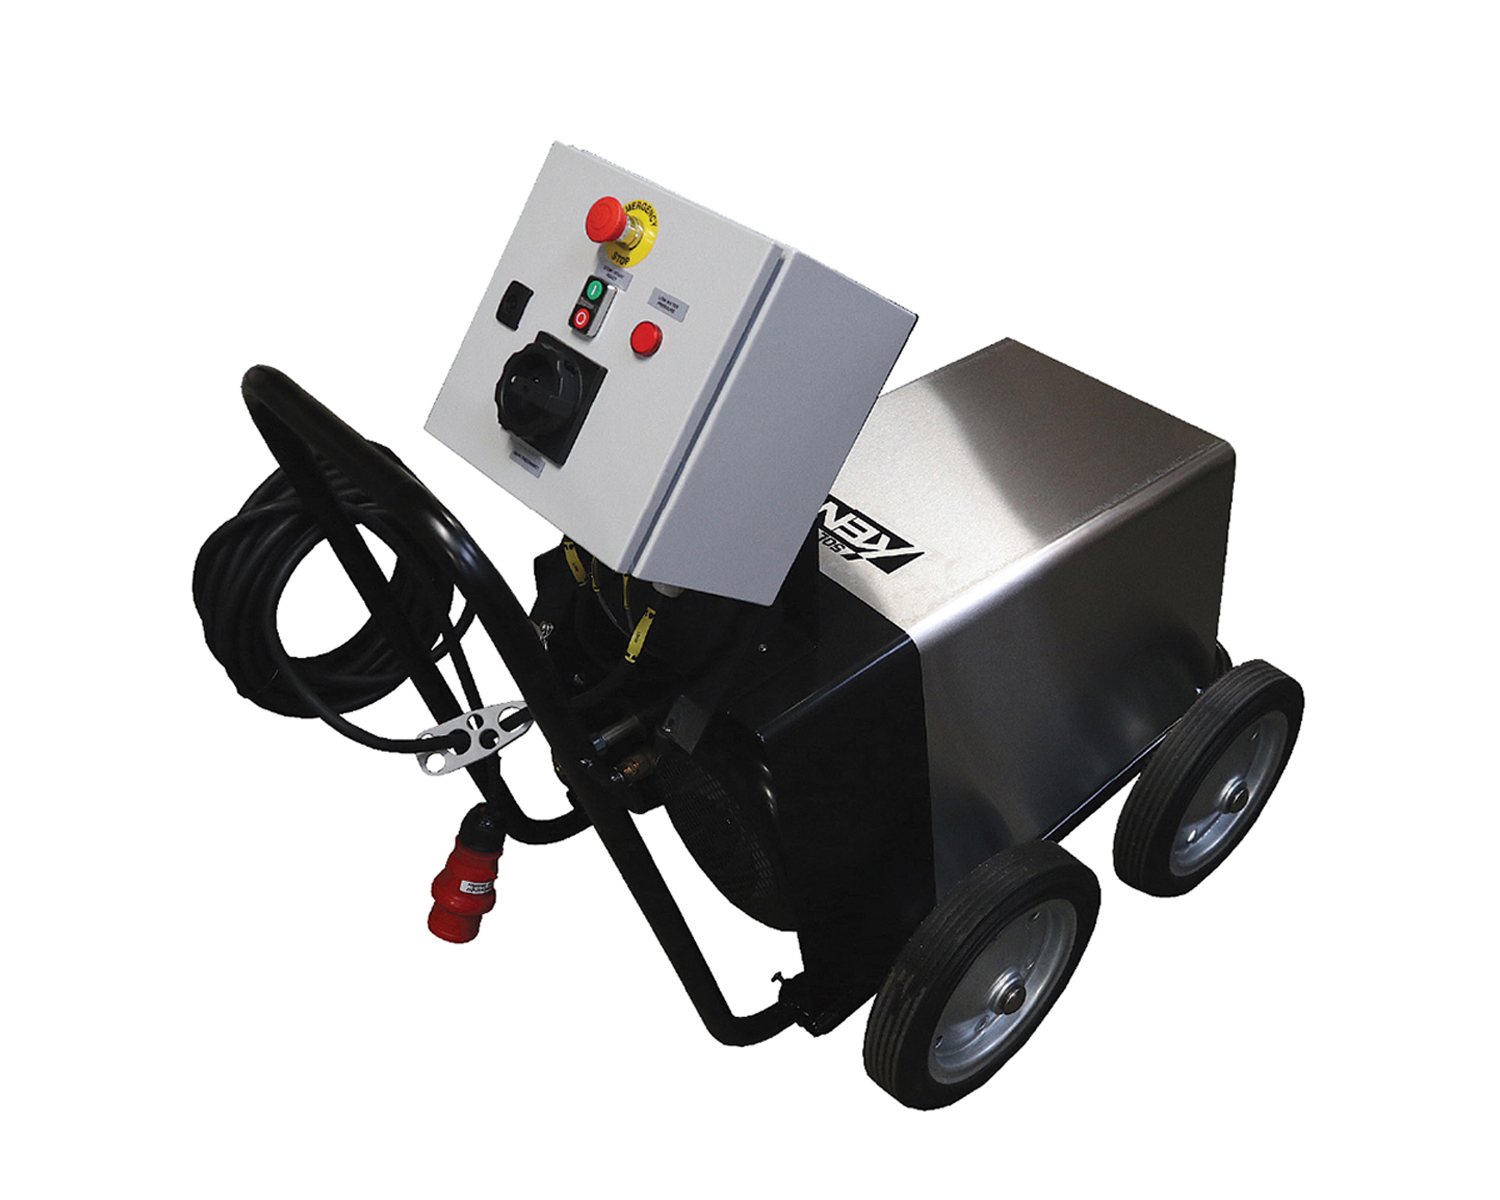 Large professional cold water cleaner 4-wheel high pressure washer for industrial and demanding applications